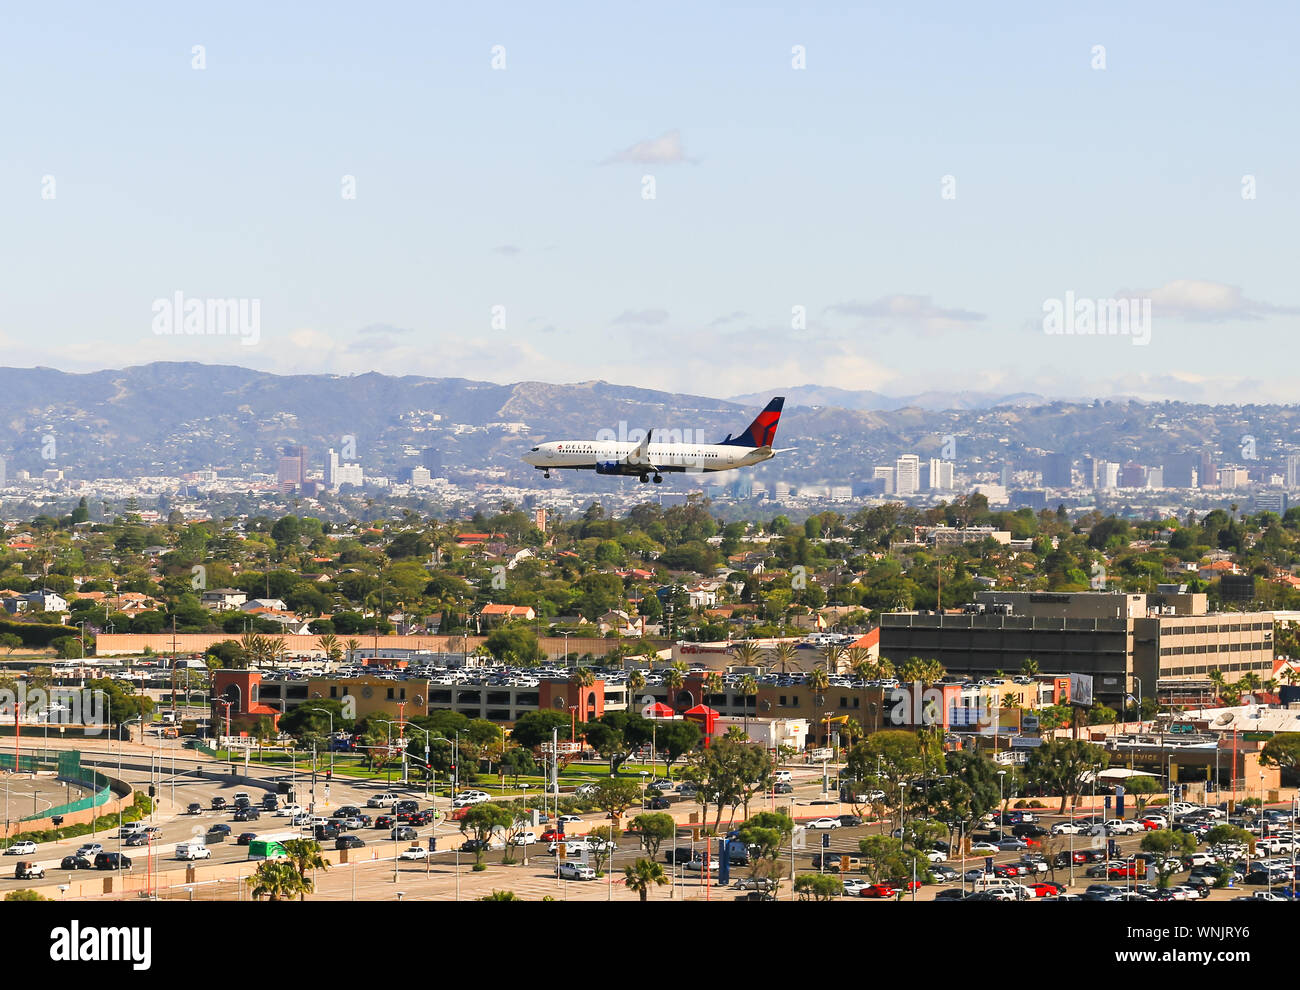 Los Angeles, California, USA - May 22, 2019: A plane from Delta Airlines lands on the Los Angeles International Airport (LAX). Stock Photo